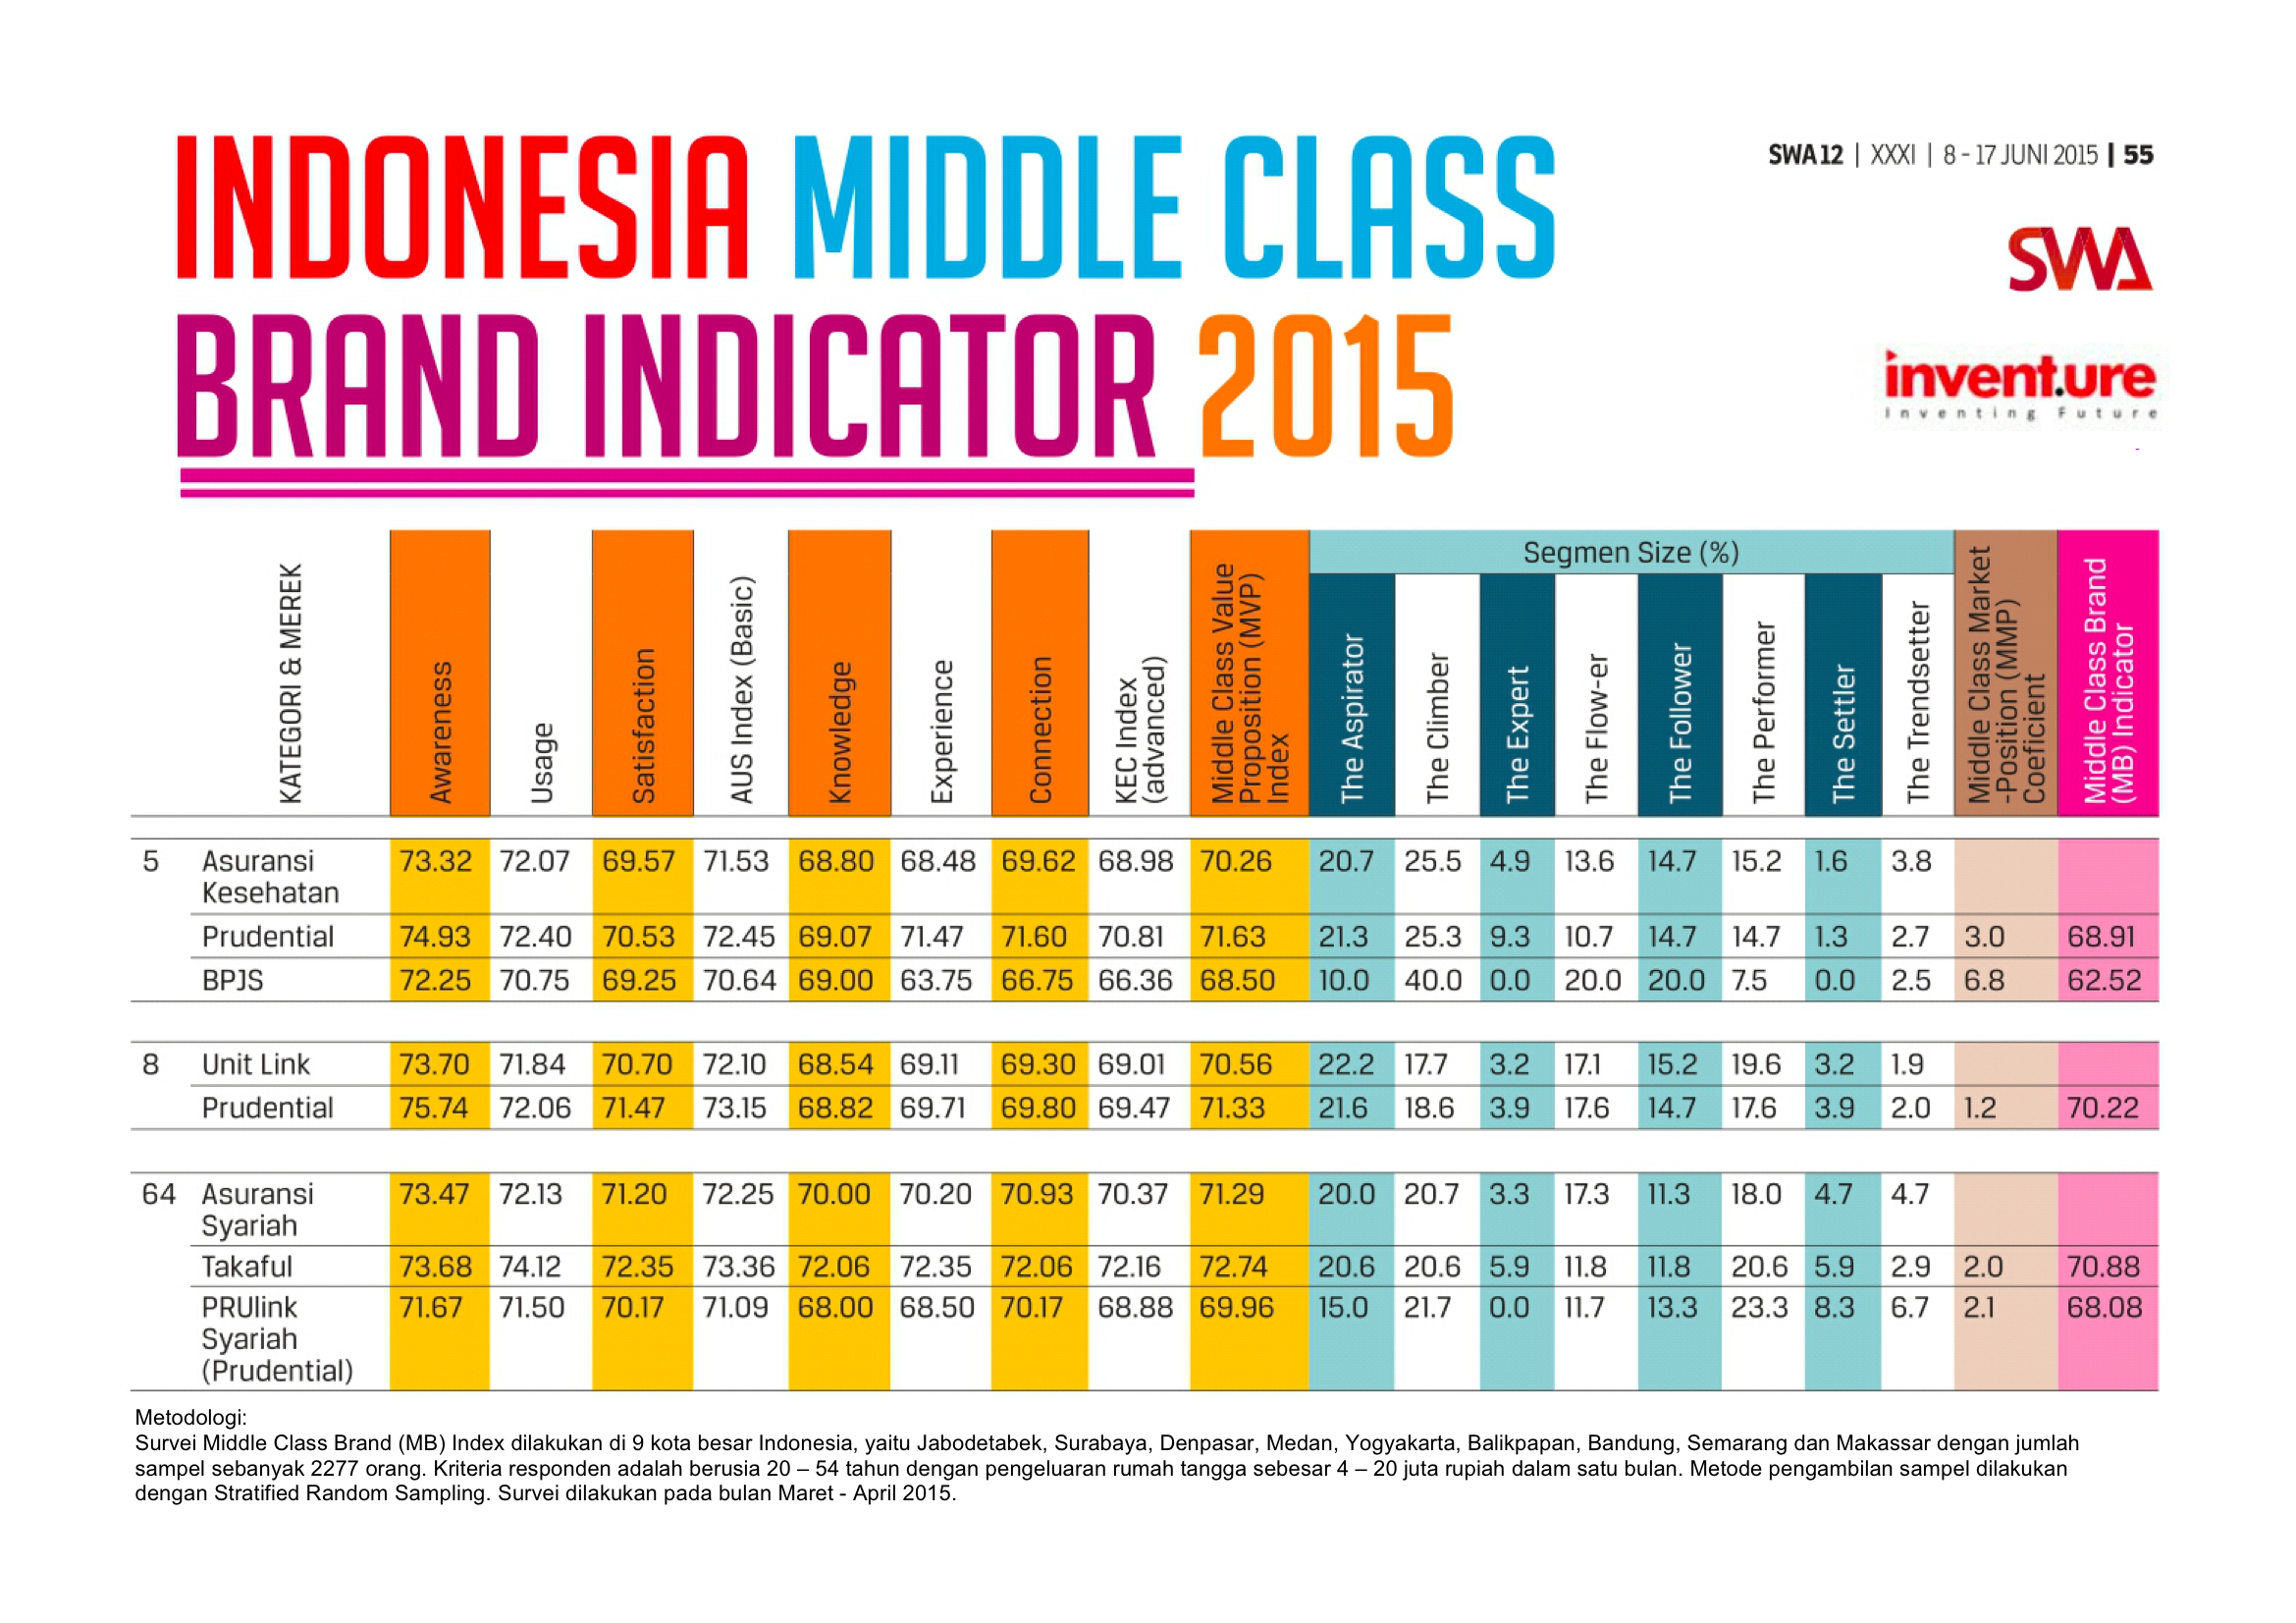 Survey: Indonesia Middle Class Brand Indicator 2015